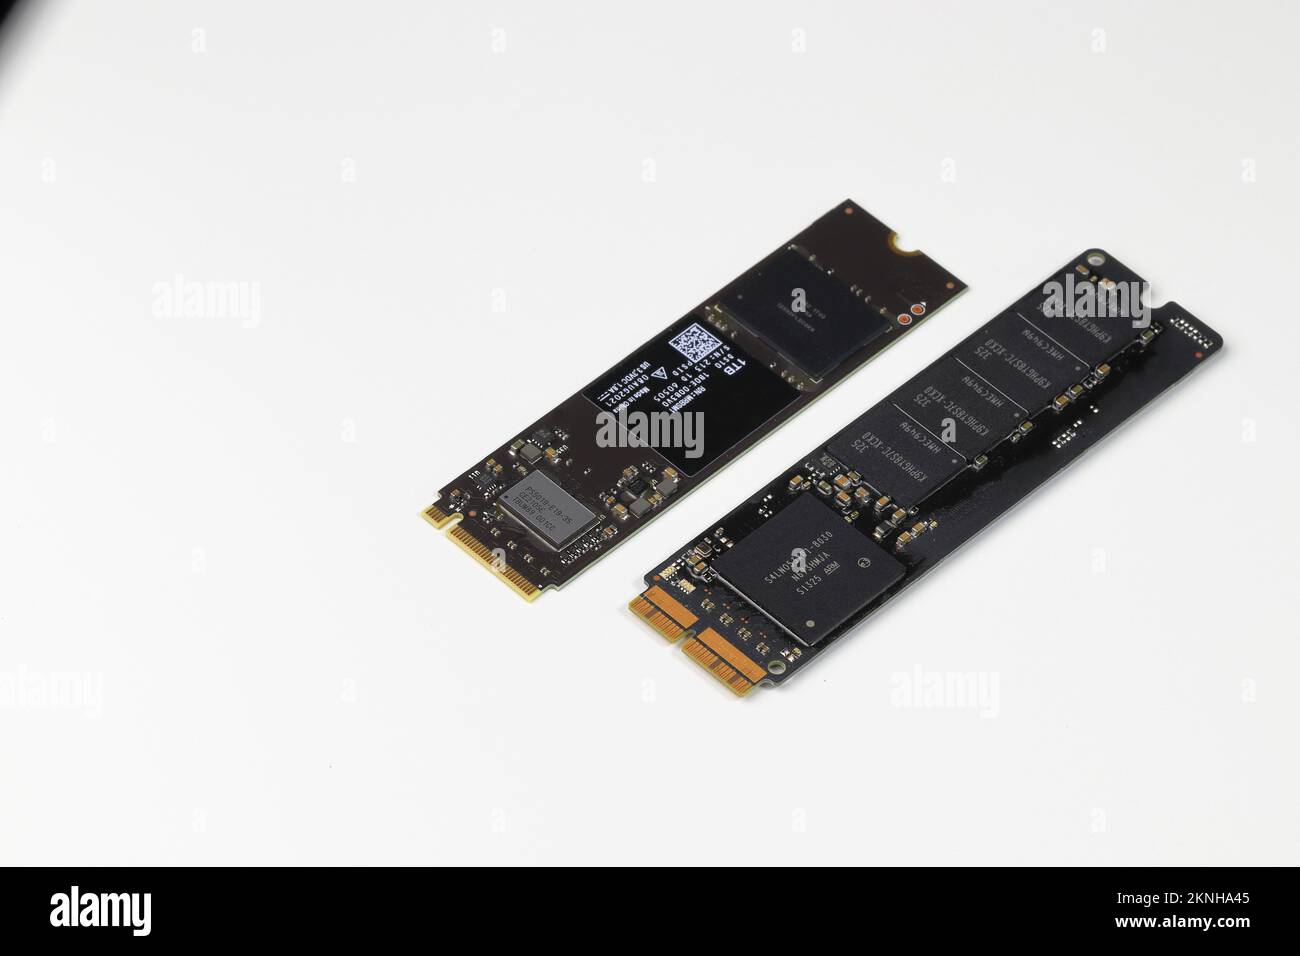 solid state drives for computer M.2 NVME PCIe, and Apple Proprietary 12+16 pin connector NVME isolated on white background. Stock Photo